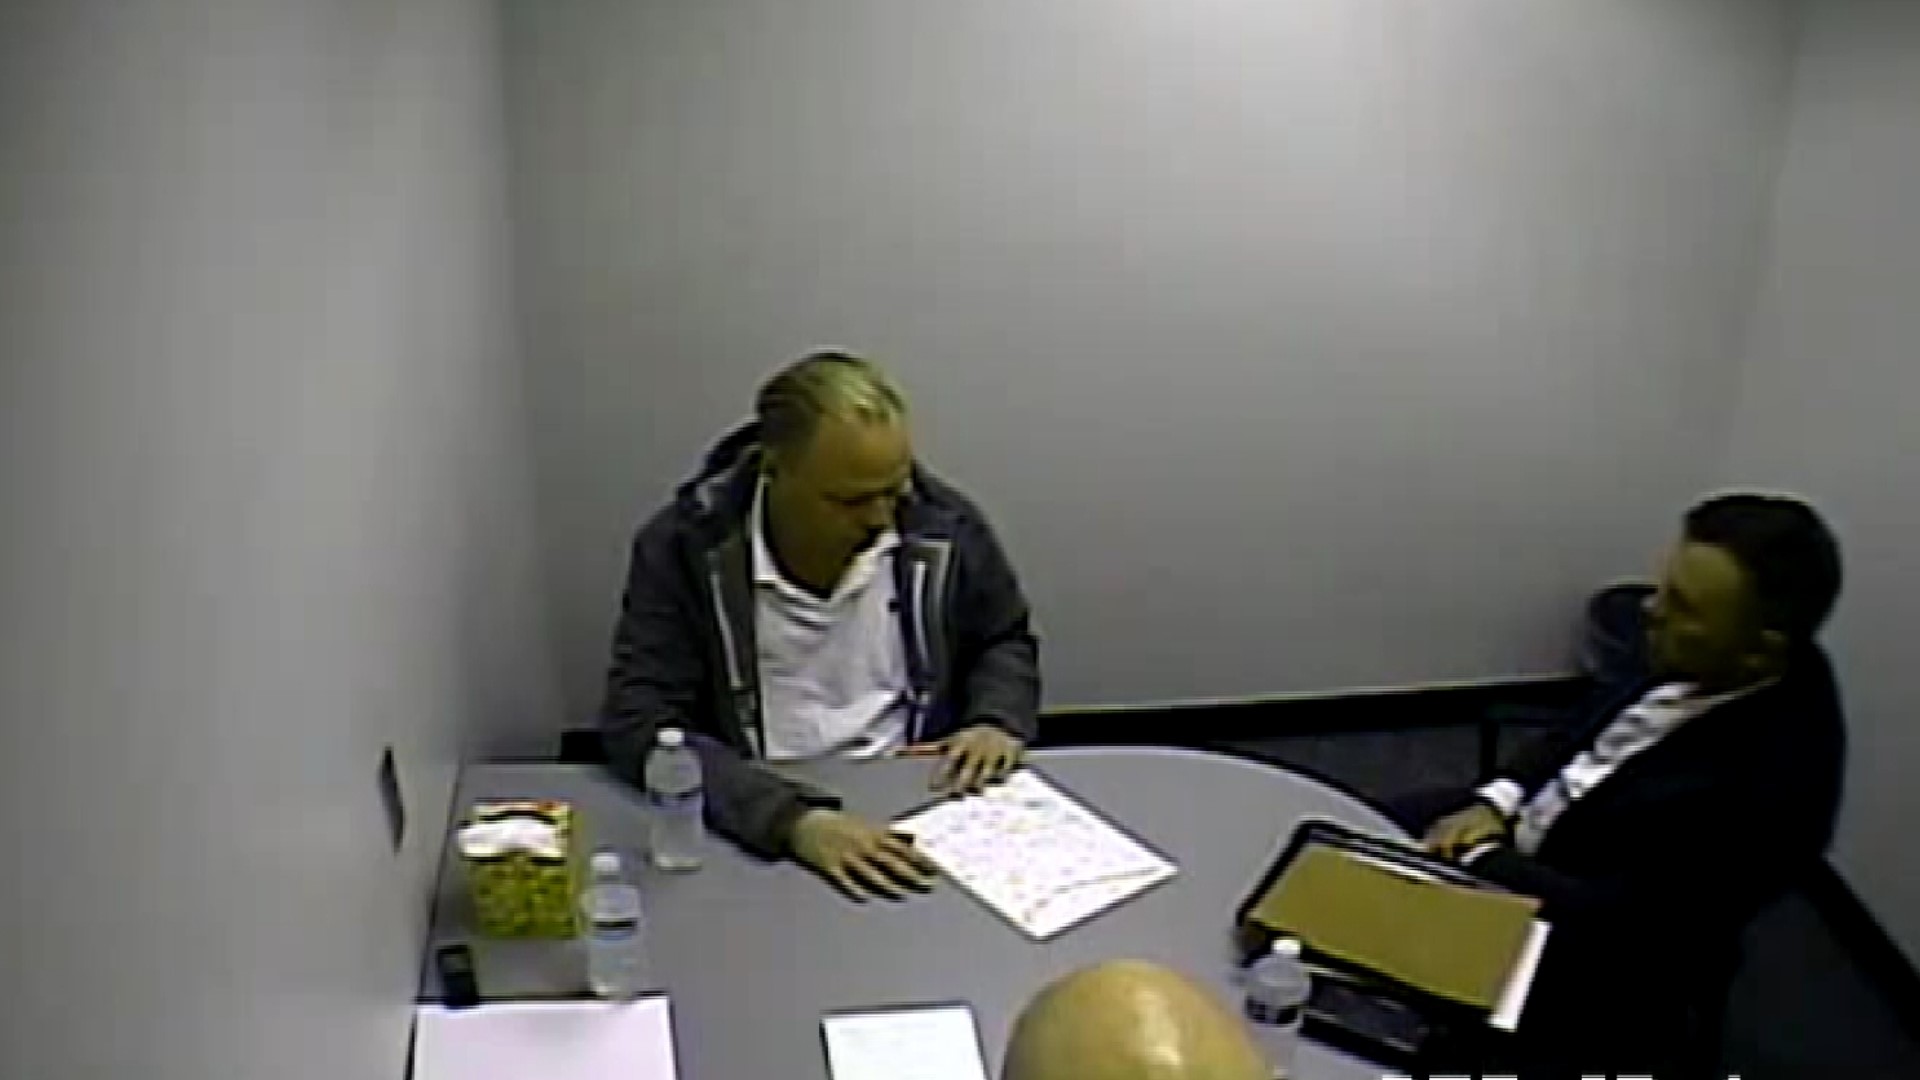 Two segments from Geoffrey Hammond's interview with detectives, included in court records.